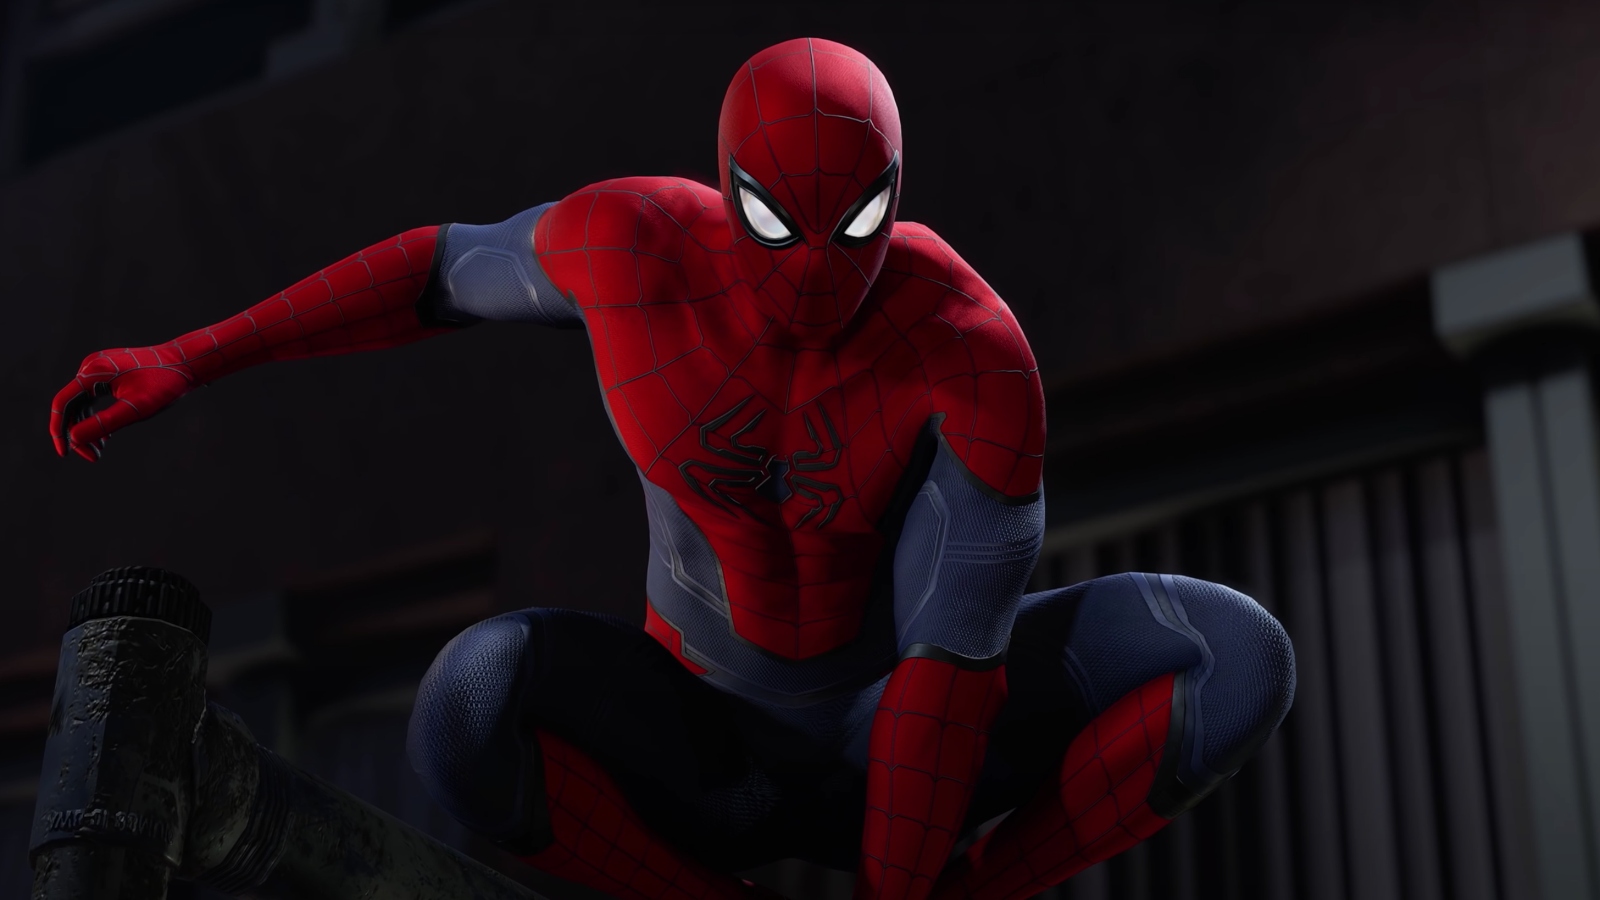 Marvel’s Avengers Spider-Man DLC Will Have No Story Missions